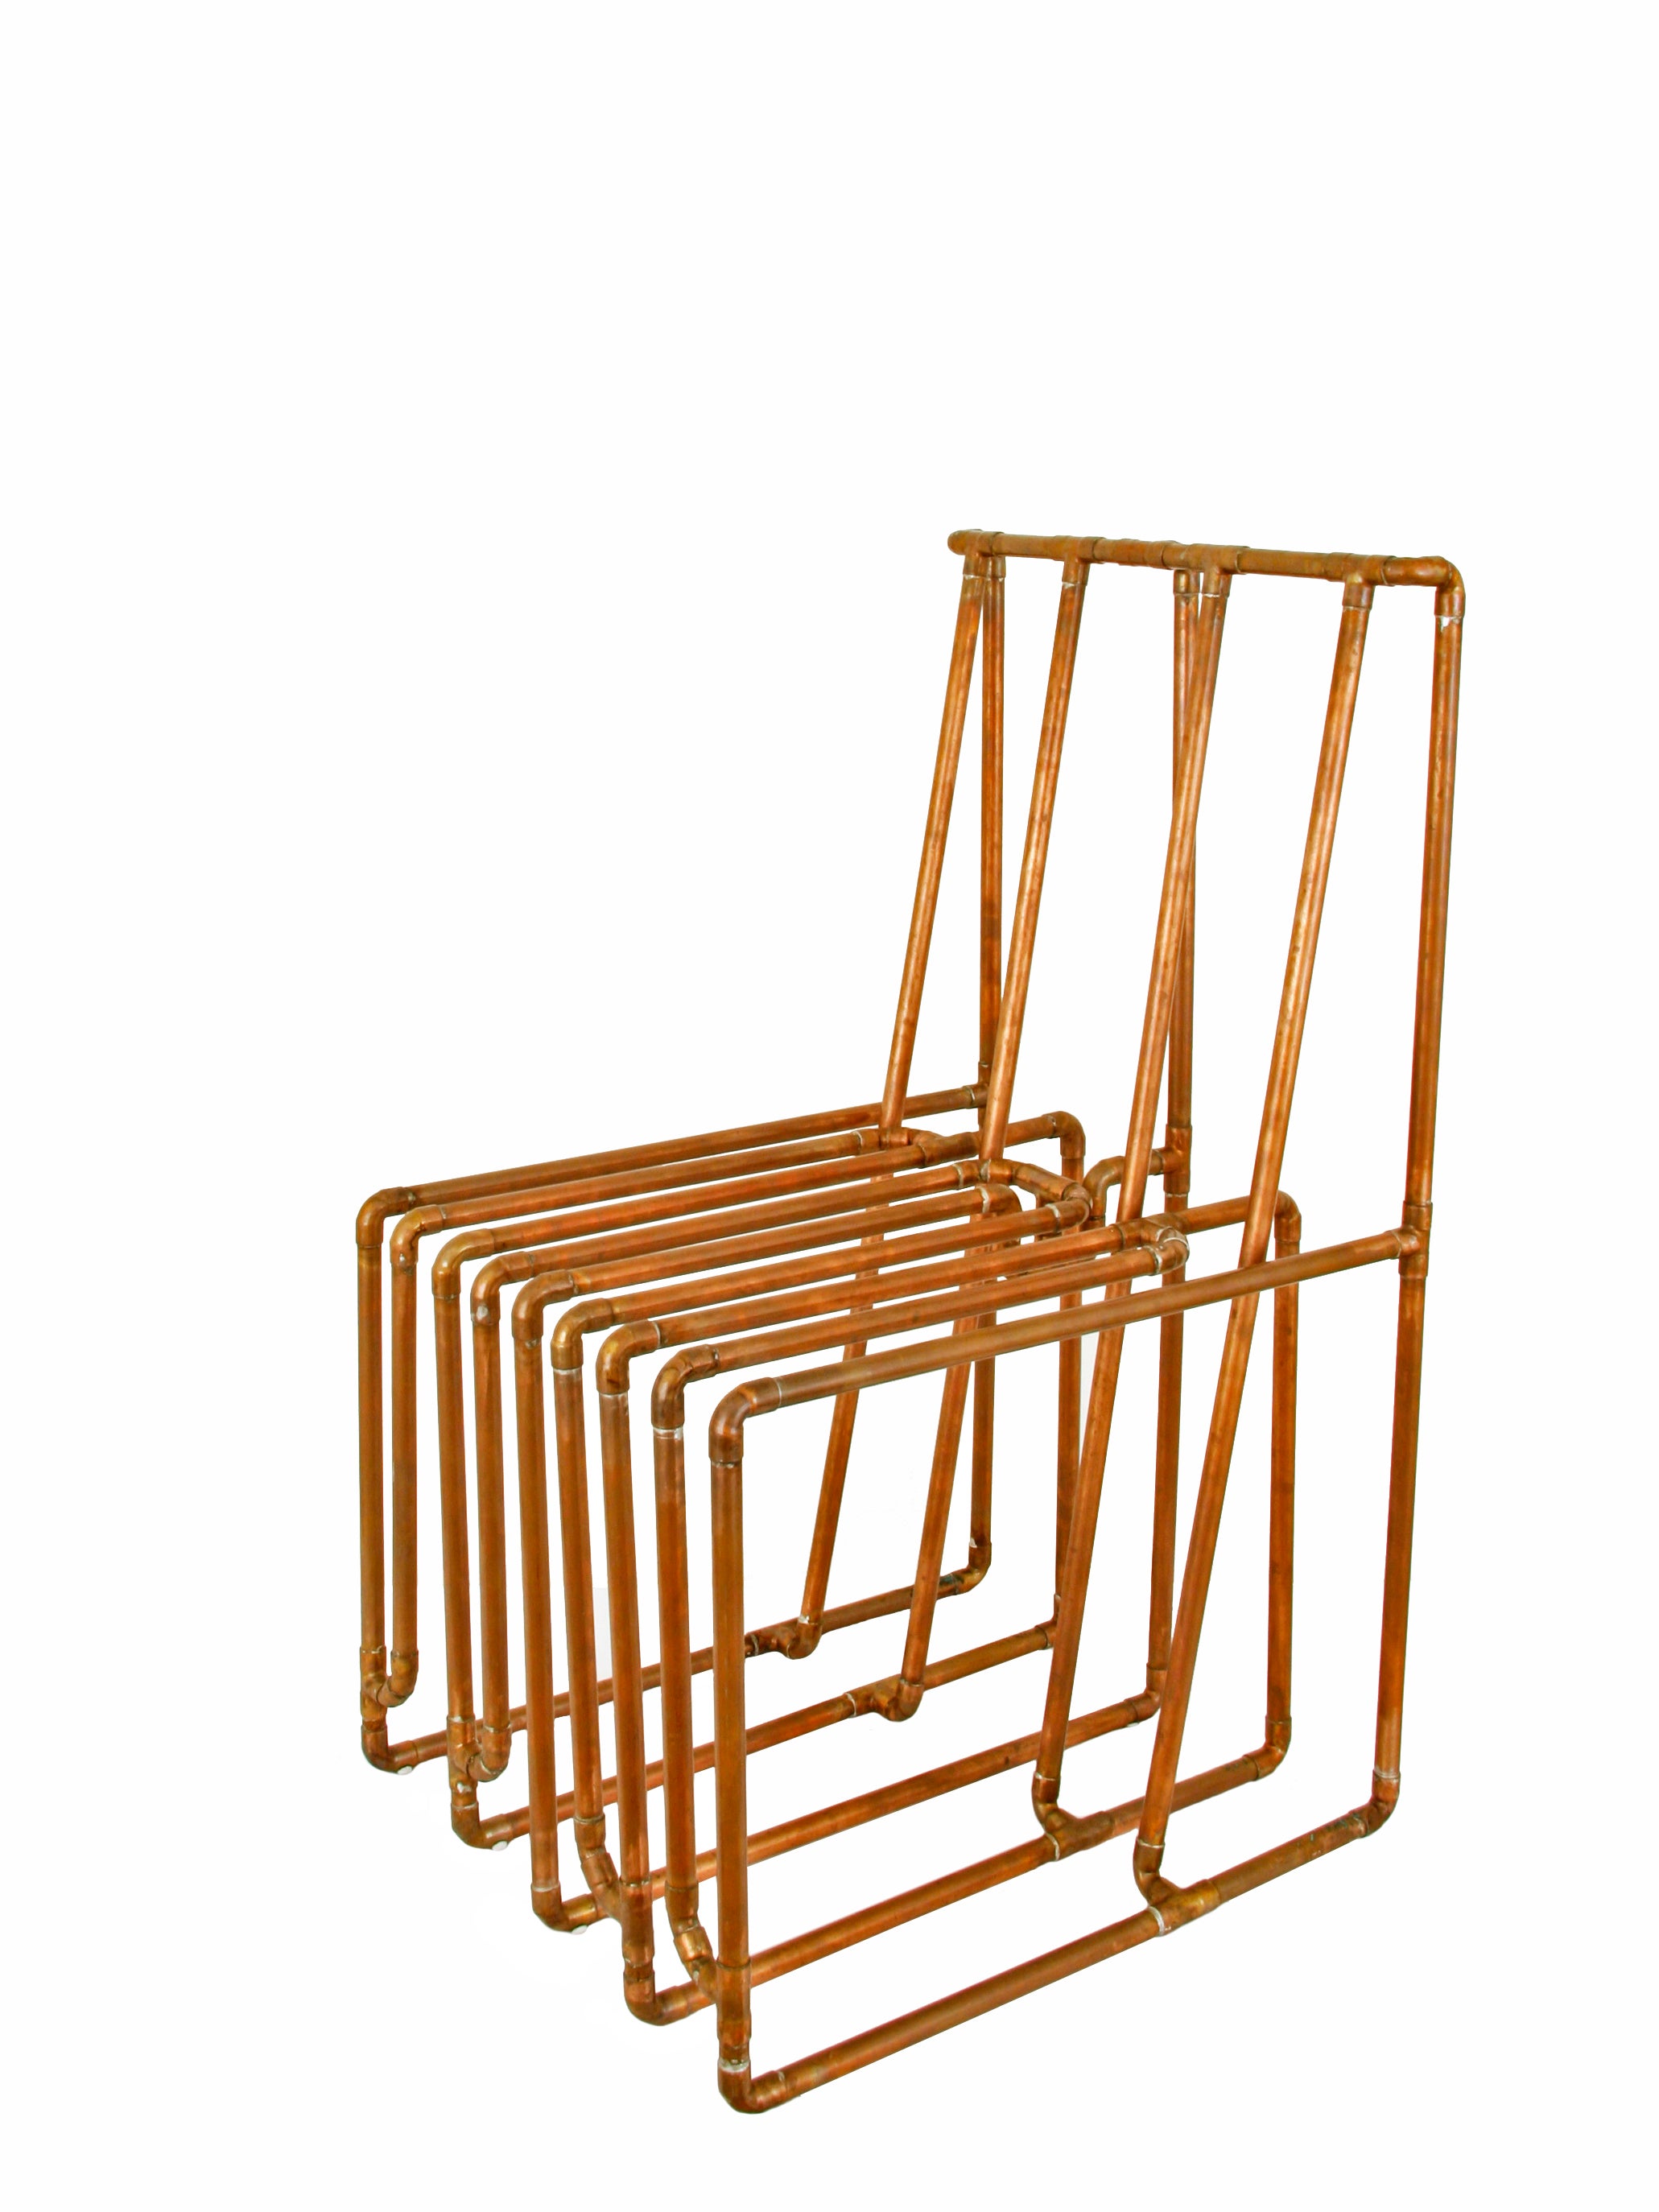 Chair in Copper by TJ Volonis